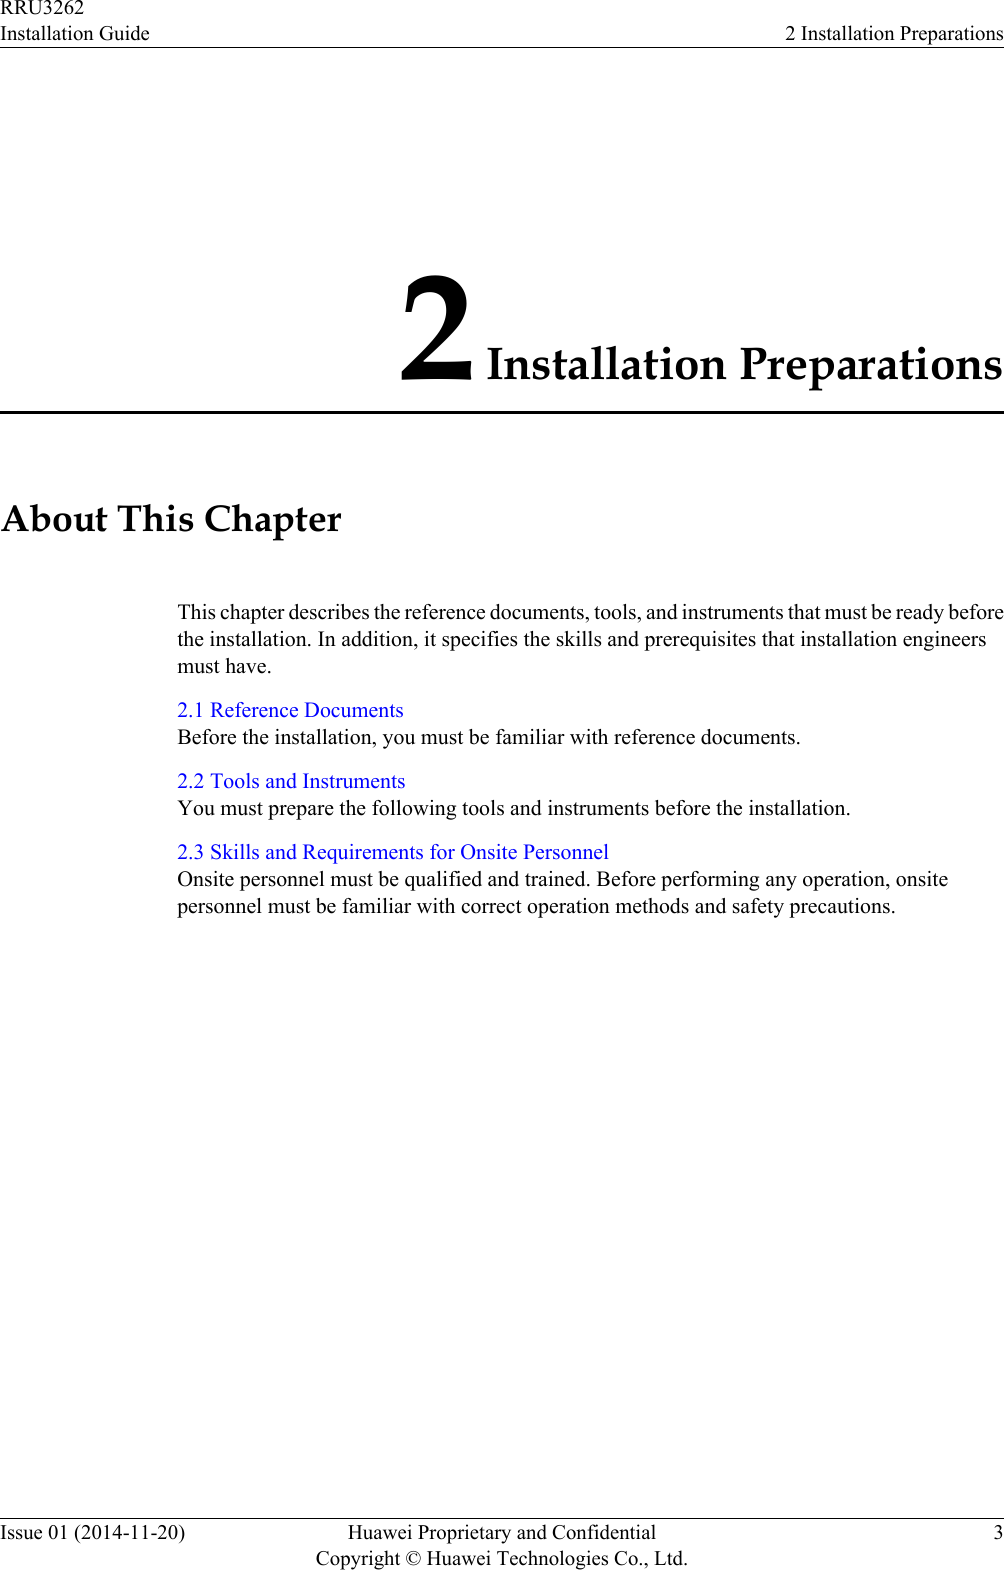 2 Installation PreparationsAbout This ChapterThis chapter describes the reference documents, tools, and instruments that must be ready beforethe installation. In addition, it specifies the skills and prerequisites that installation engineersmust have.2.1 Reference DocumentsBefore the installation, you must be familiar with reference documents.2.2 Tools and InstrumentsYou must prepare the following tools and instruments before the installation.2.3 Skills and Requirements for Onsite PersonnelOnsite personnel must be qualified and trained. Before performing any operation, onsitepersonnel must be familiar with correct operation methods and safety precautions.RRU3262Installation Guide 2 Installation PreparationsIssue 01 (2014-11-20) Huawei Proprietary and ConfidentialCopyright © Huawei Technologies Co., Ltd.3